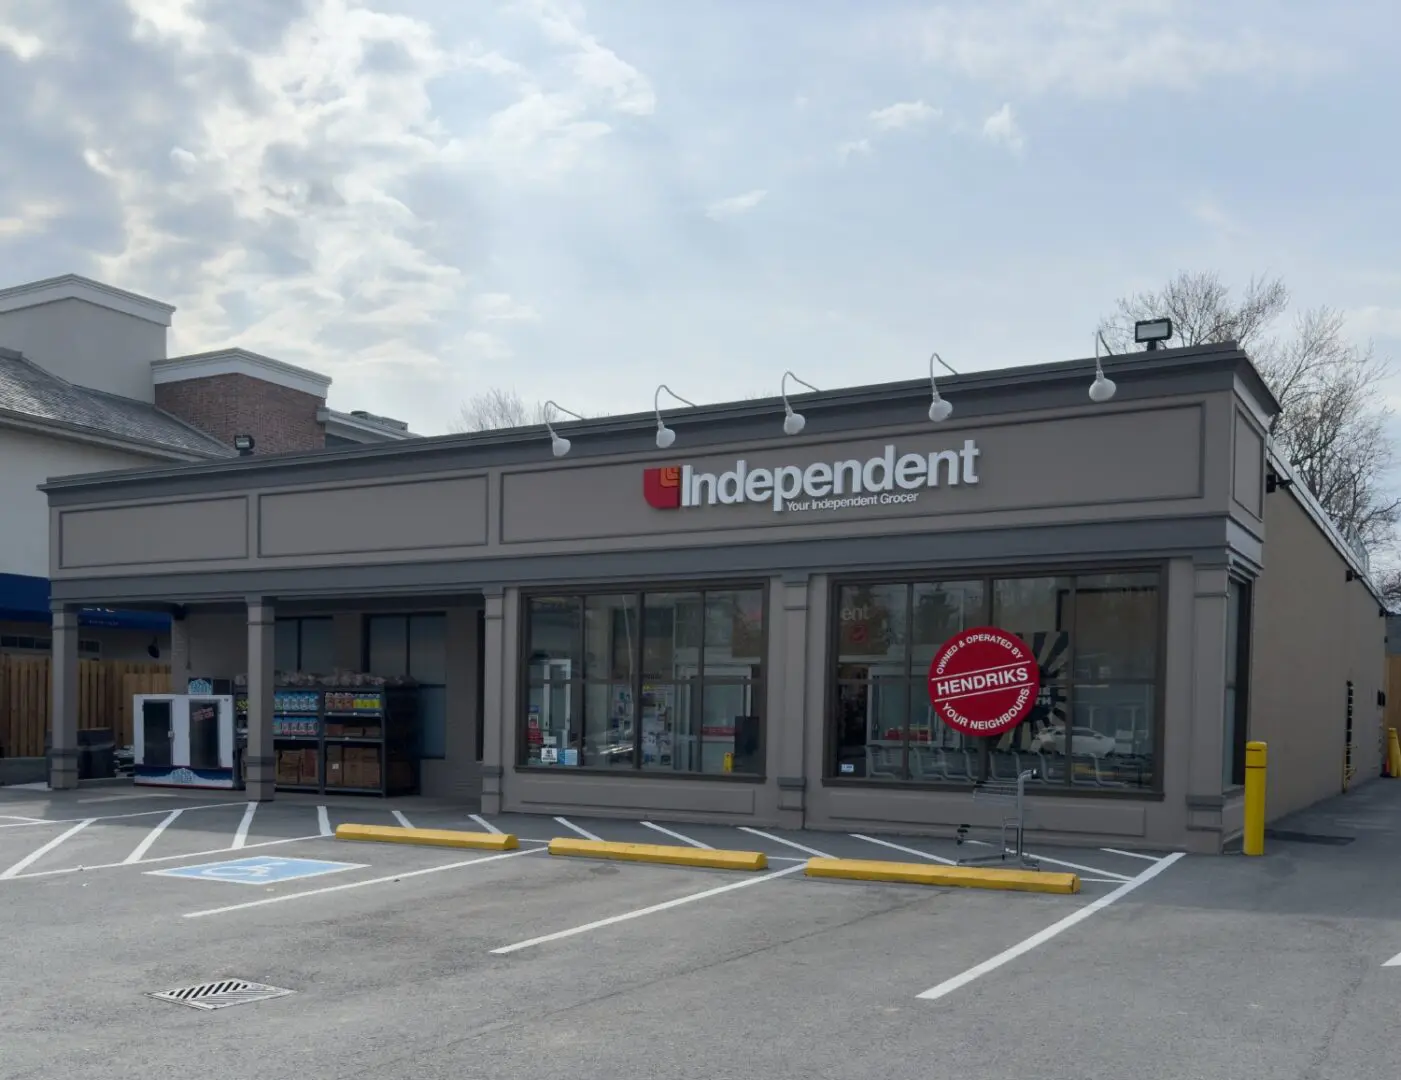 A store front with a sign that says " independent ".